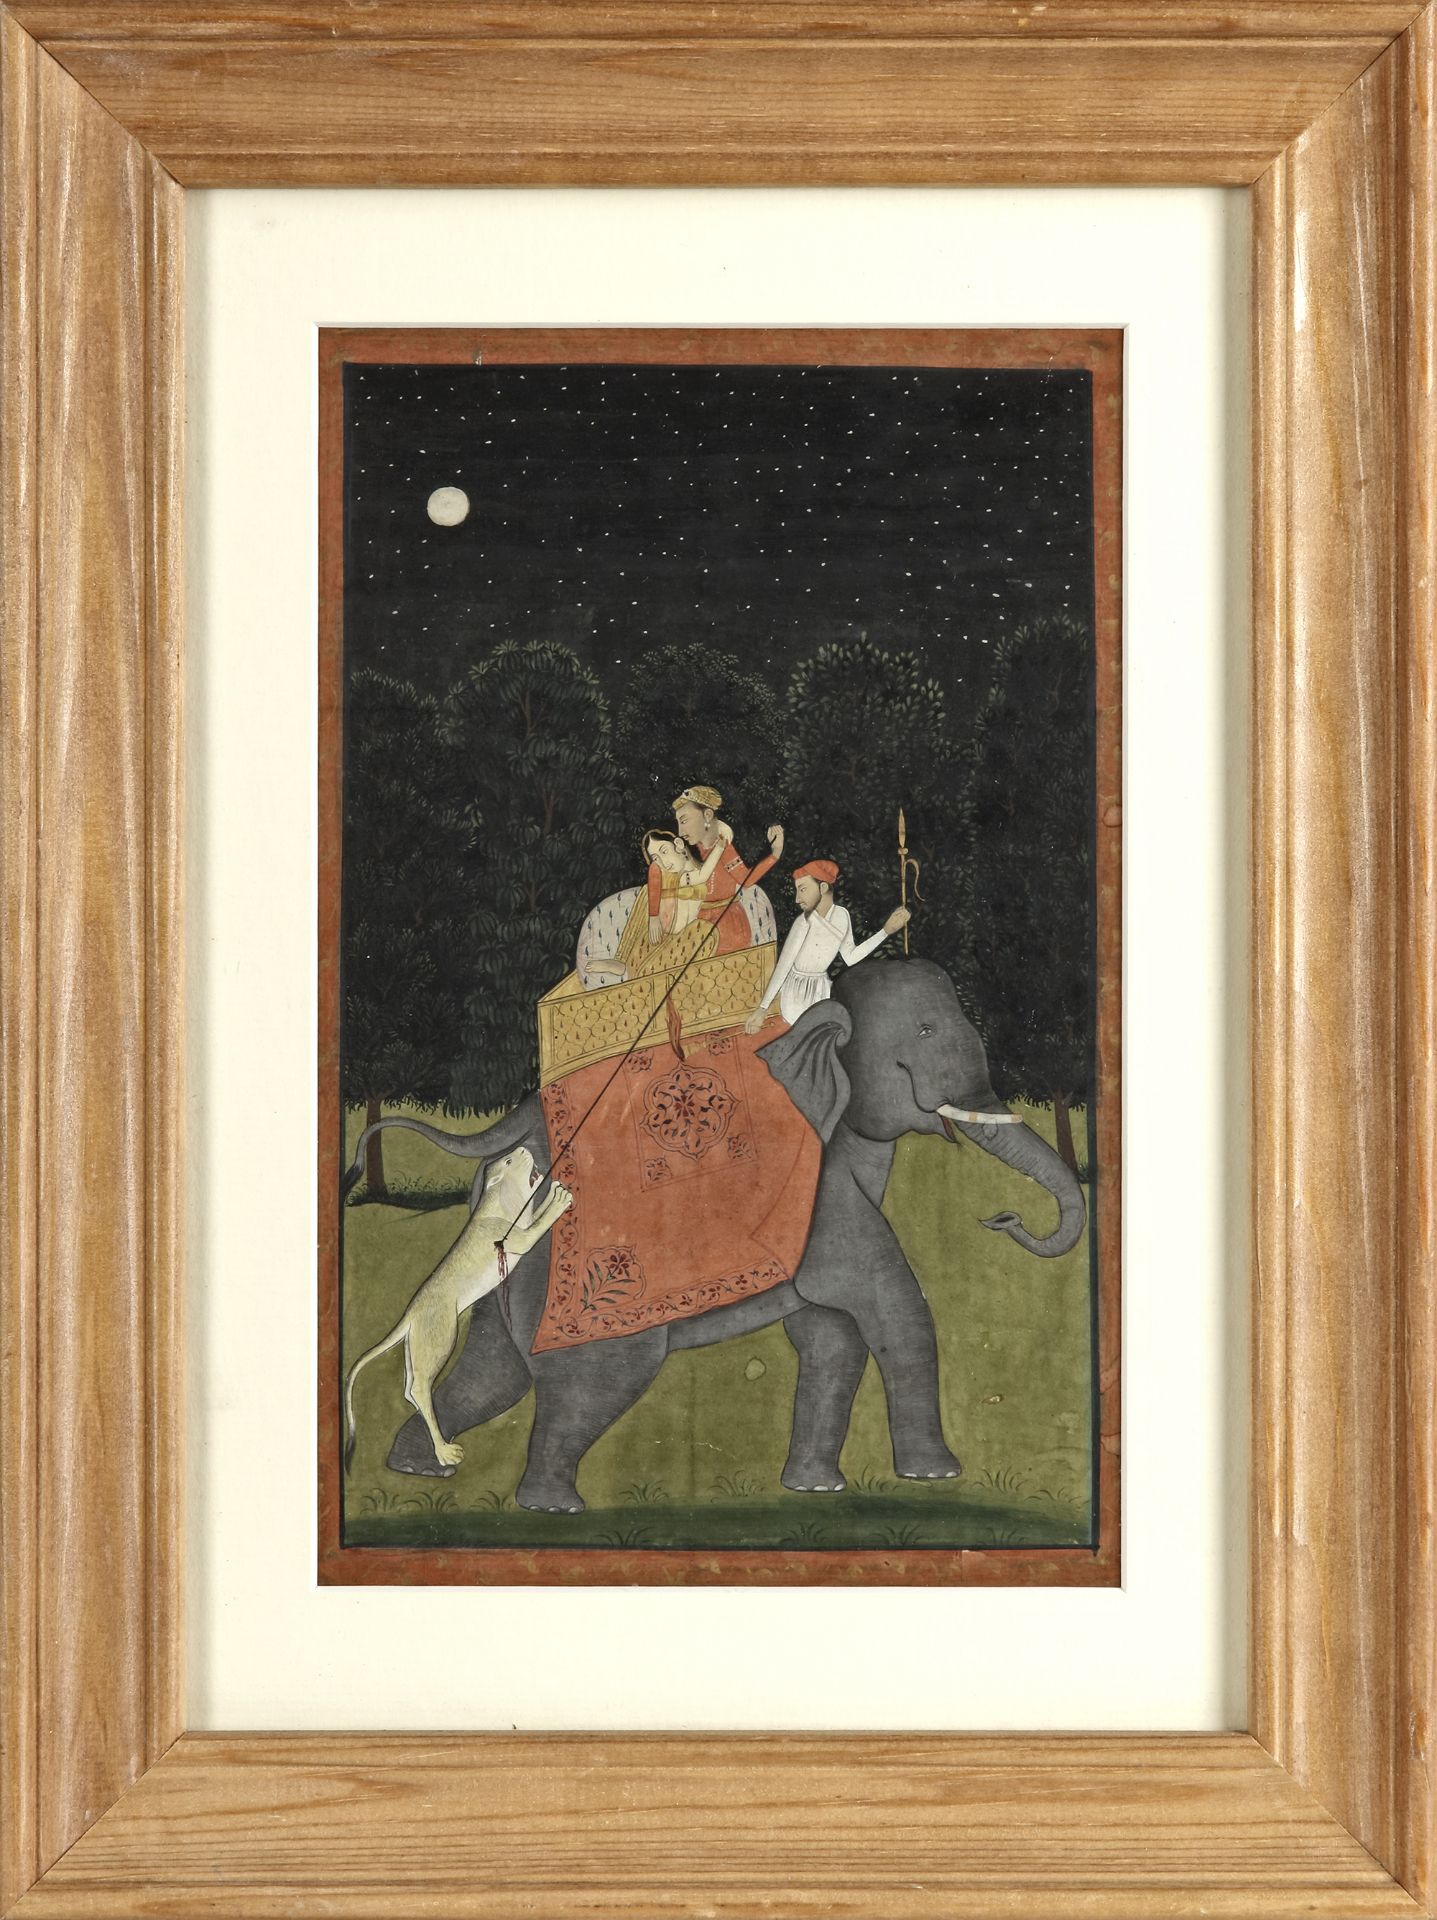 A PRINCE WITH HIS CONSORT HUNTING A LION, NORTH INDIA, 19TH CENTURY - Image 4 of 4